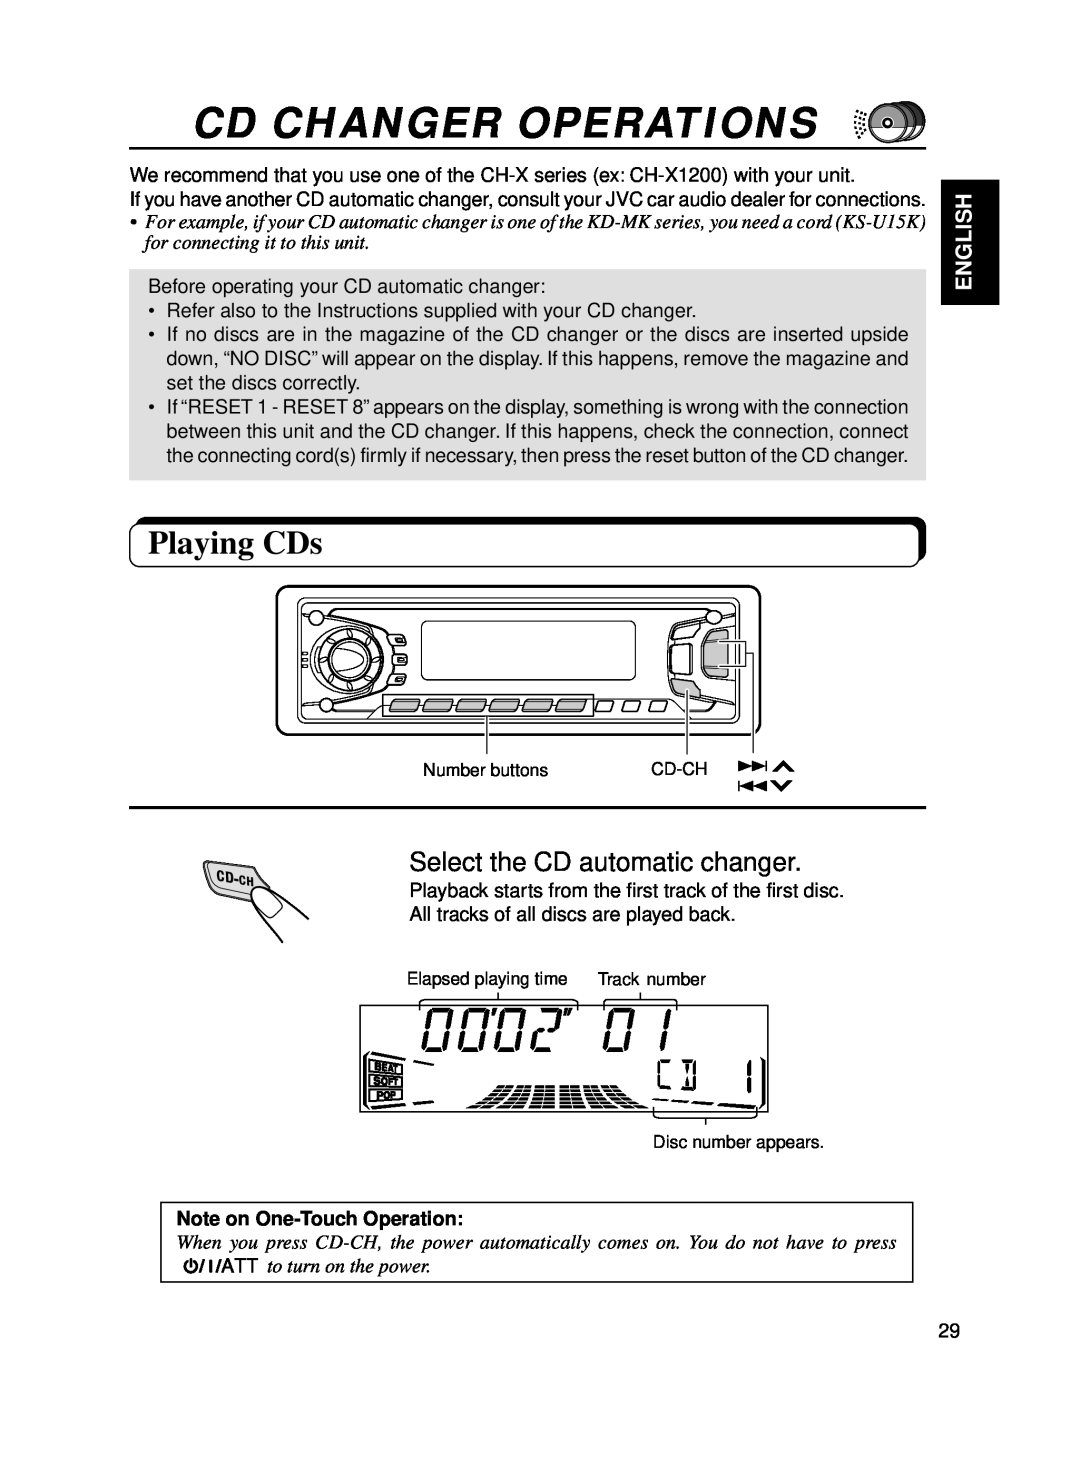 JVC KD-SX870 Cd Changer Operations, Playing CDs, Select the CD automatic changer, English, Note on One-TouchOperation 